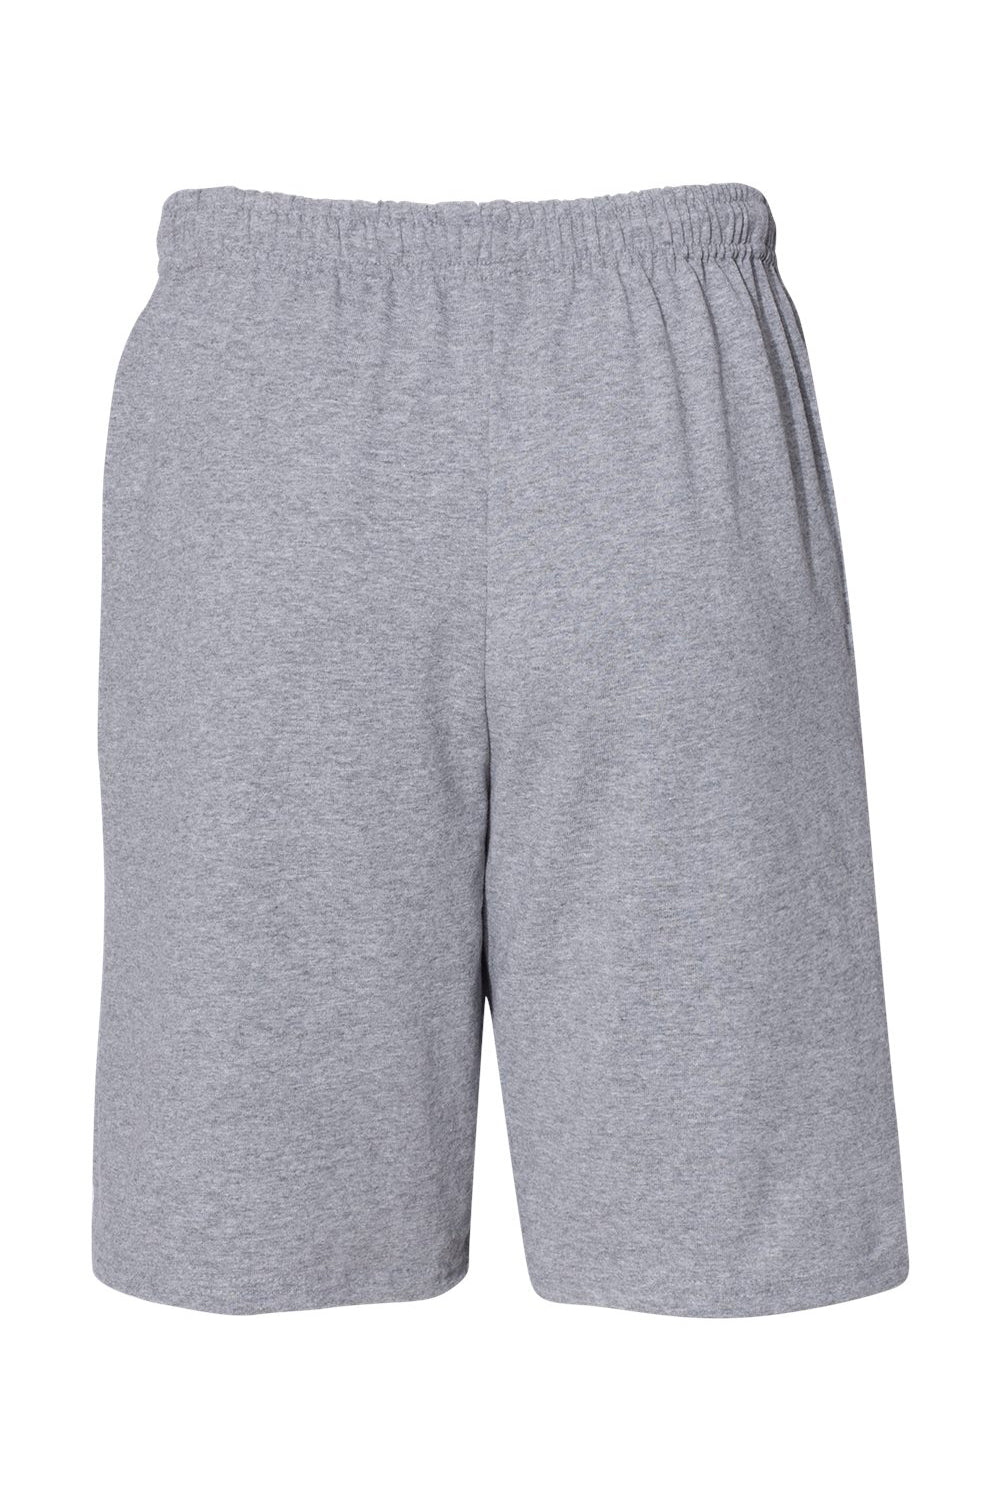 Russell Athletic 25843M Mens Classic Jersey Shorts w/ Pockets Oxford Grey Flat Back